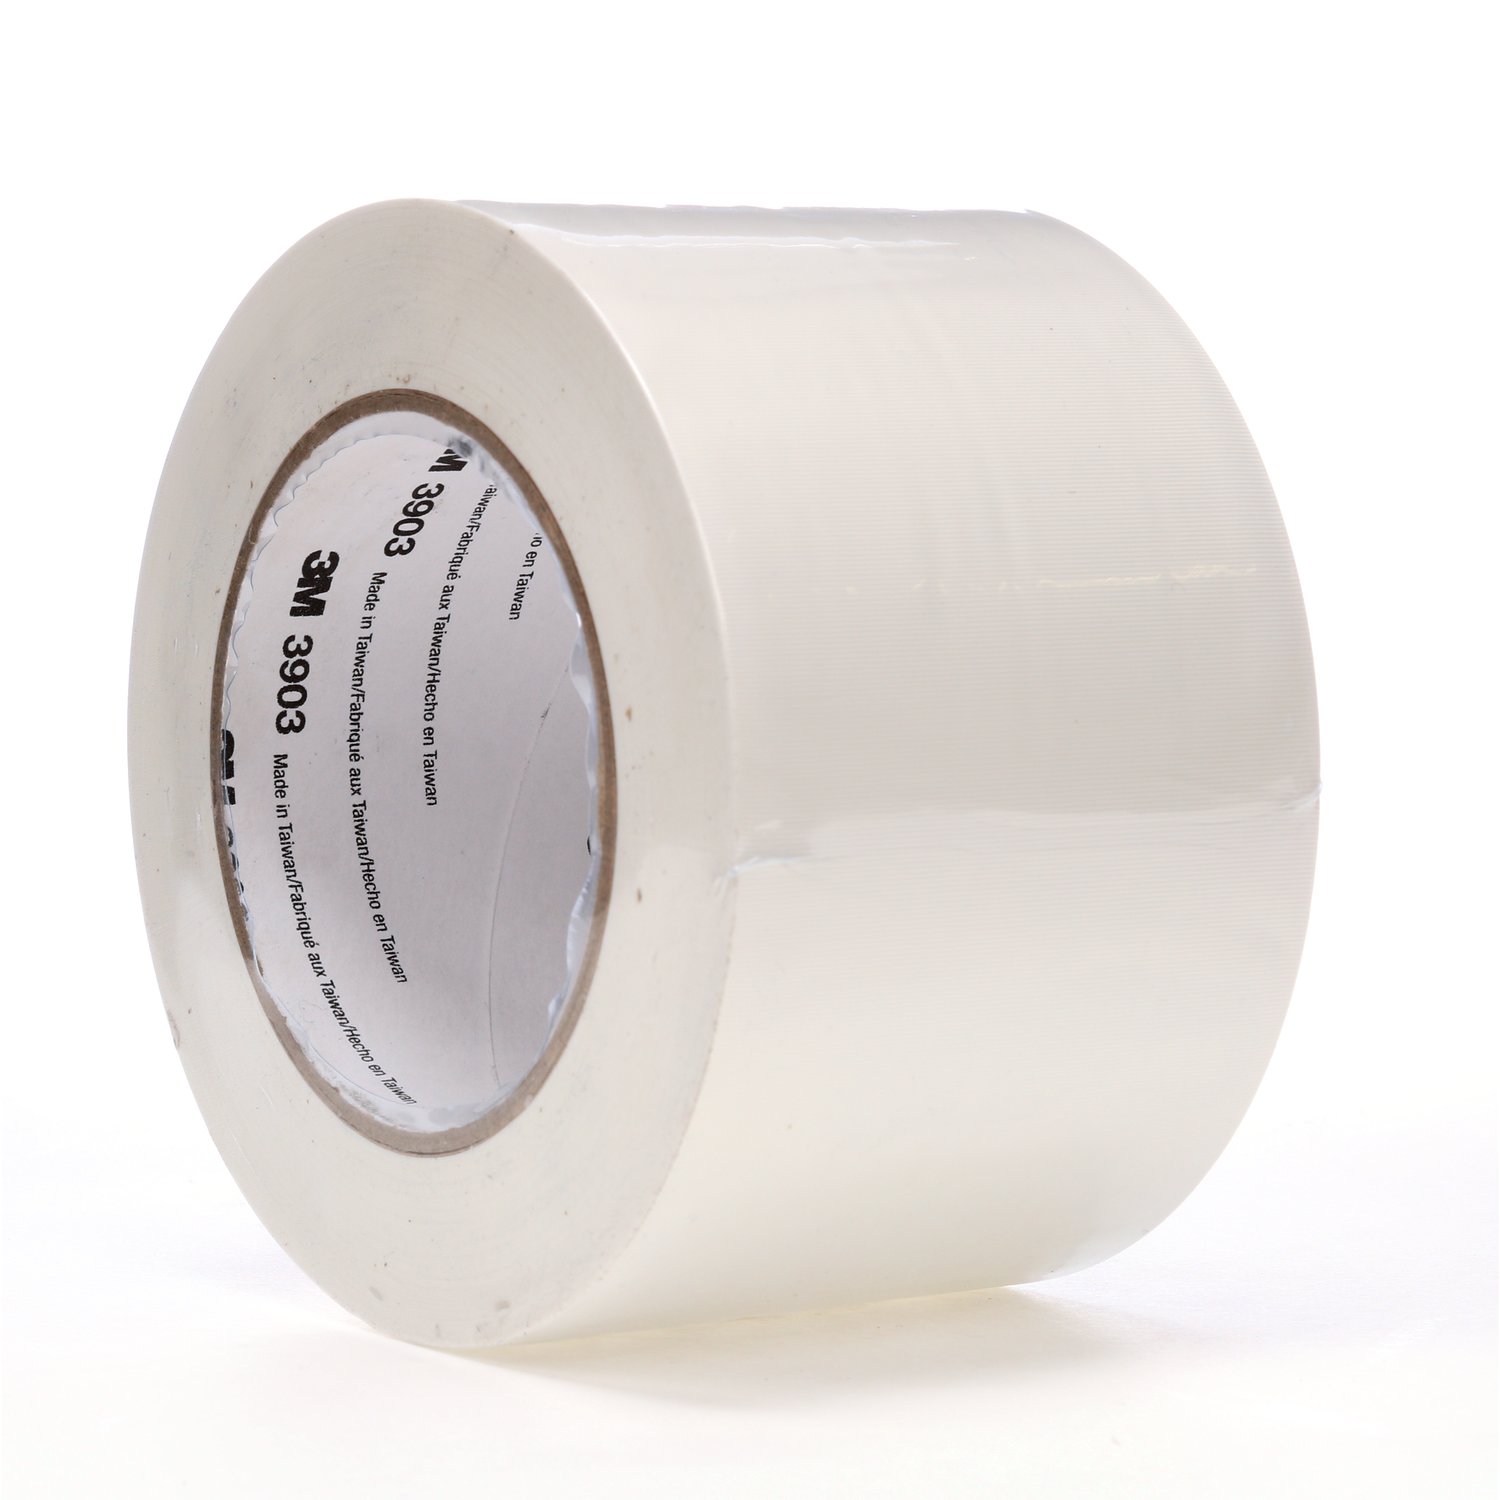 7100153654 - 3M Vinyl Duct Tape 3903, White, 3 in x 50 yd, 6.5 mil, 18 Roll/Case, Individually Wrapped Conveniently Packaged